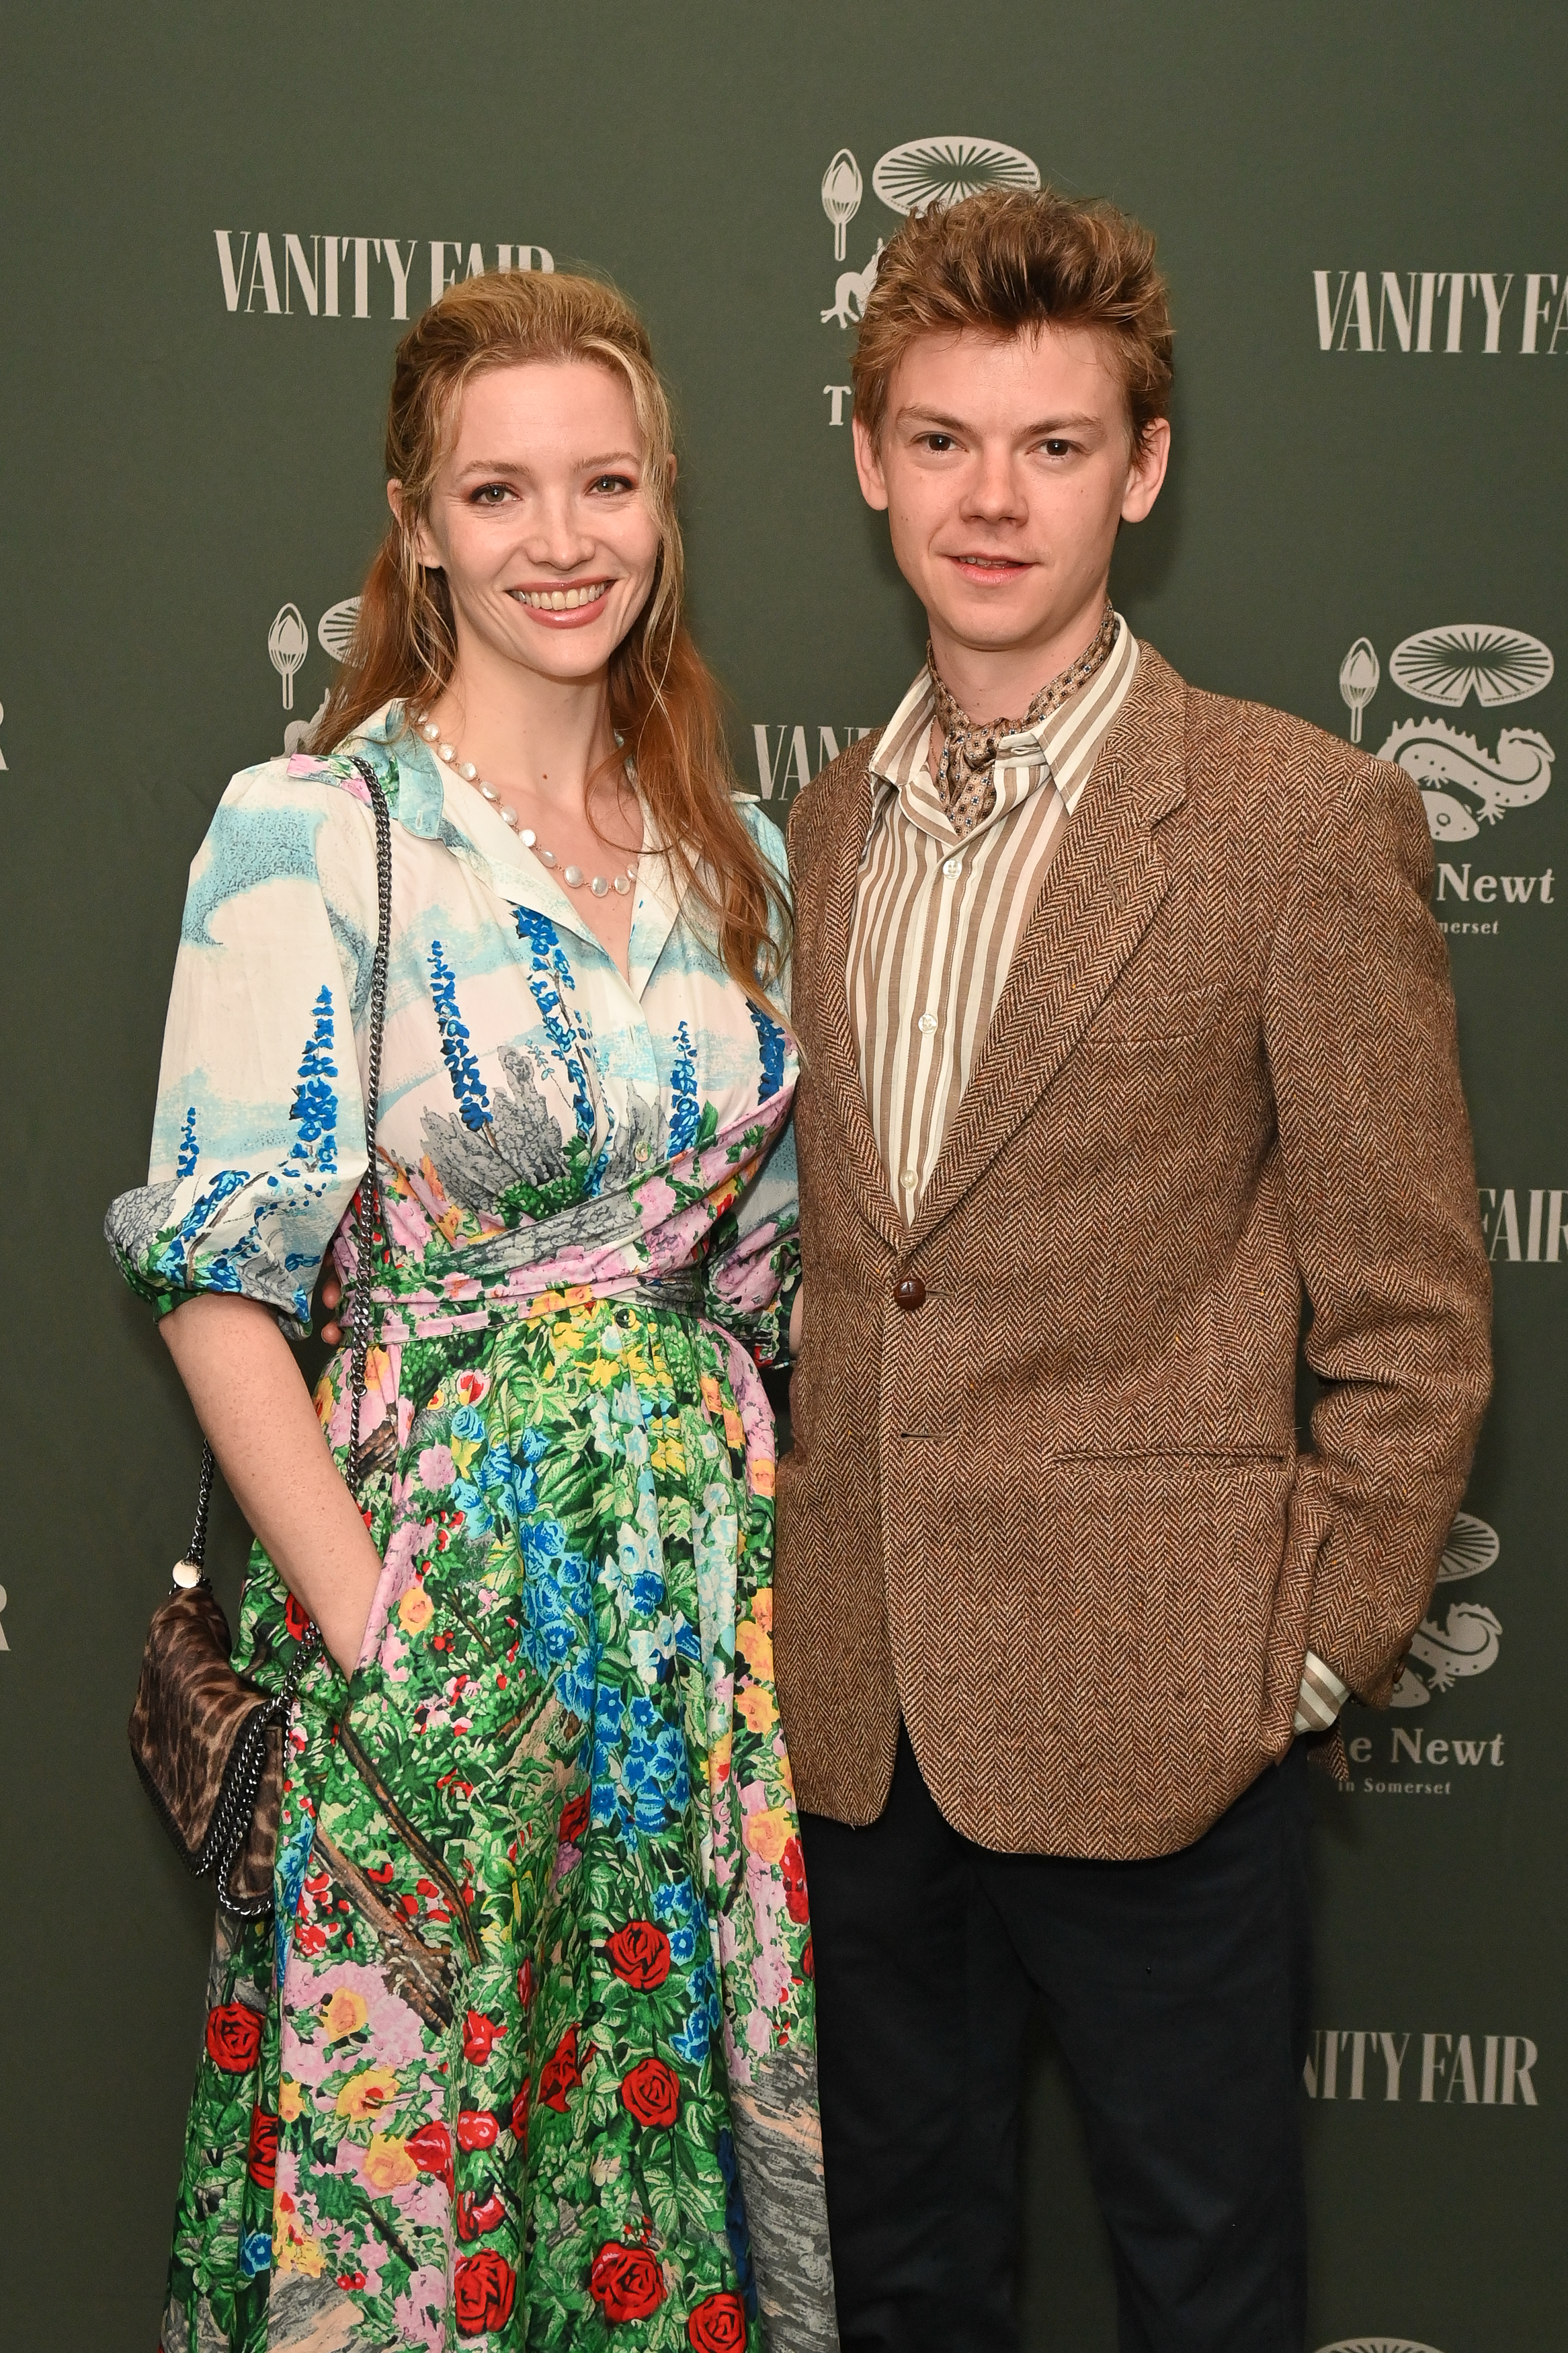 LONDON, ENGLAND - MAY 21: Talulah Riley and Thomas Brodie-Sangster attend Vanity Fair and The Newt in Somerset's celebration of The RHS Chelsea Flower Show on May 21, 2024 in London, England. (Photo by Dave Benett/Getty Images for Condé Nast)